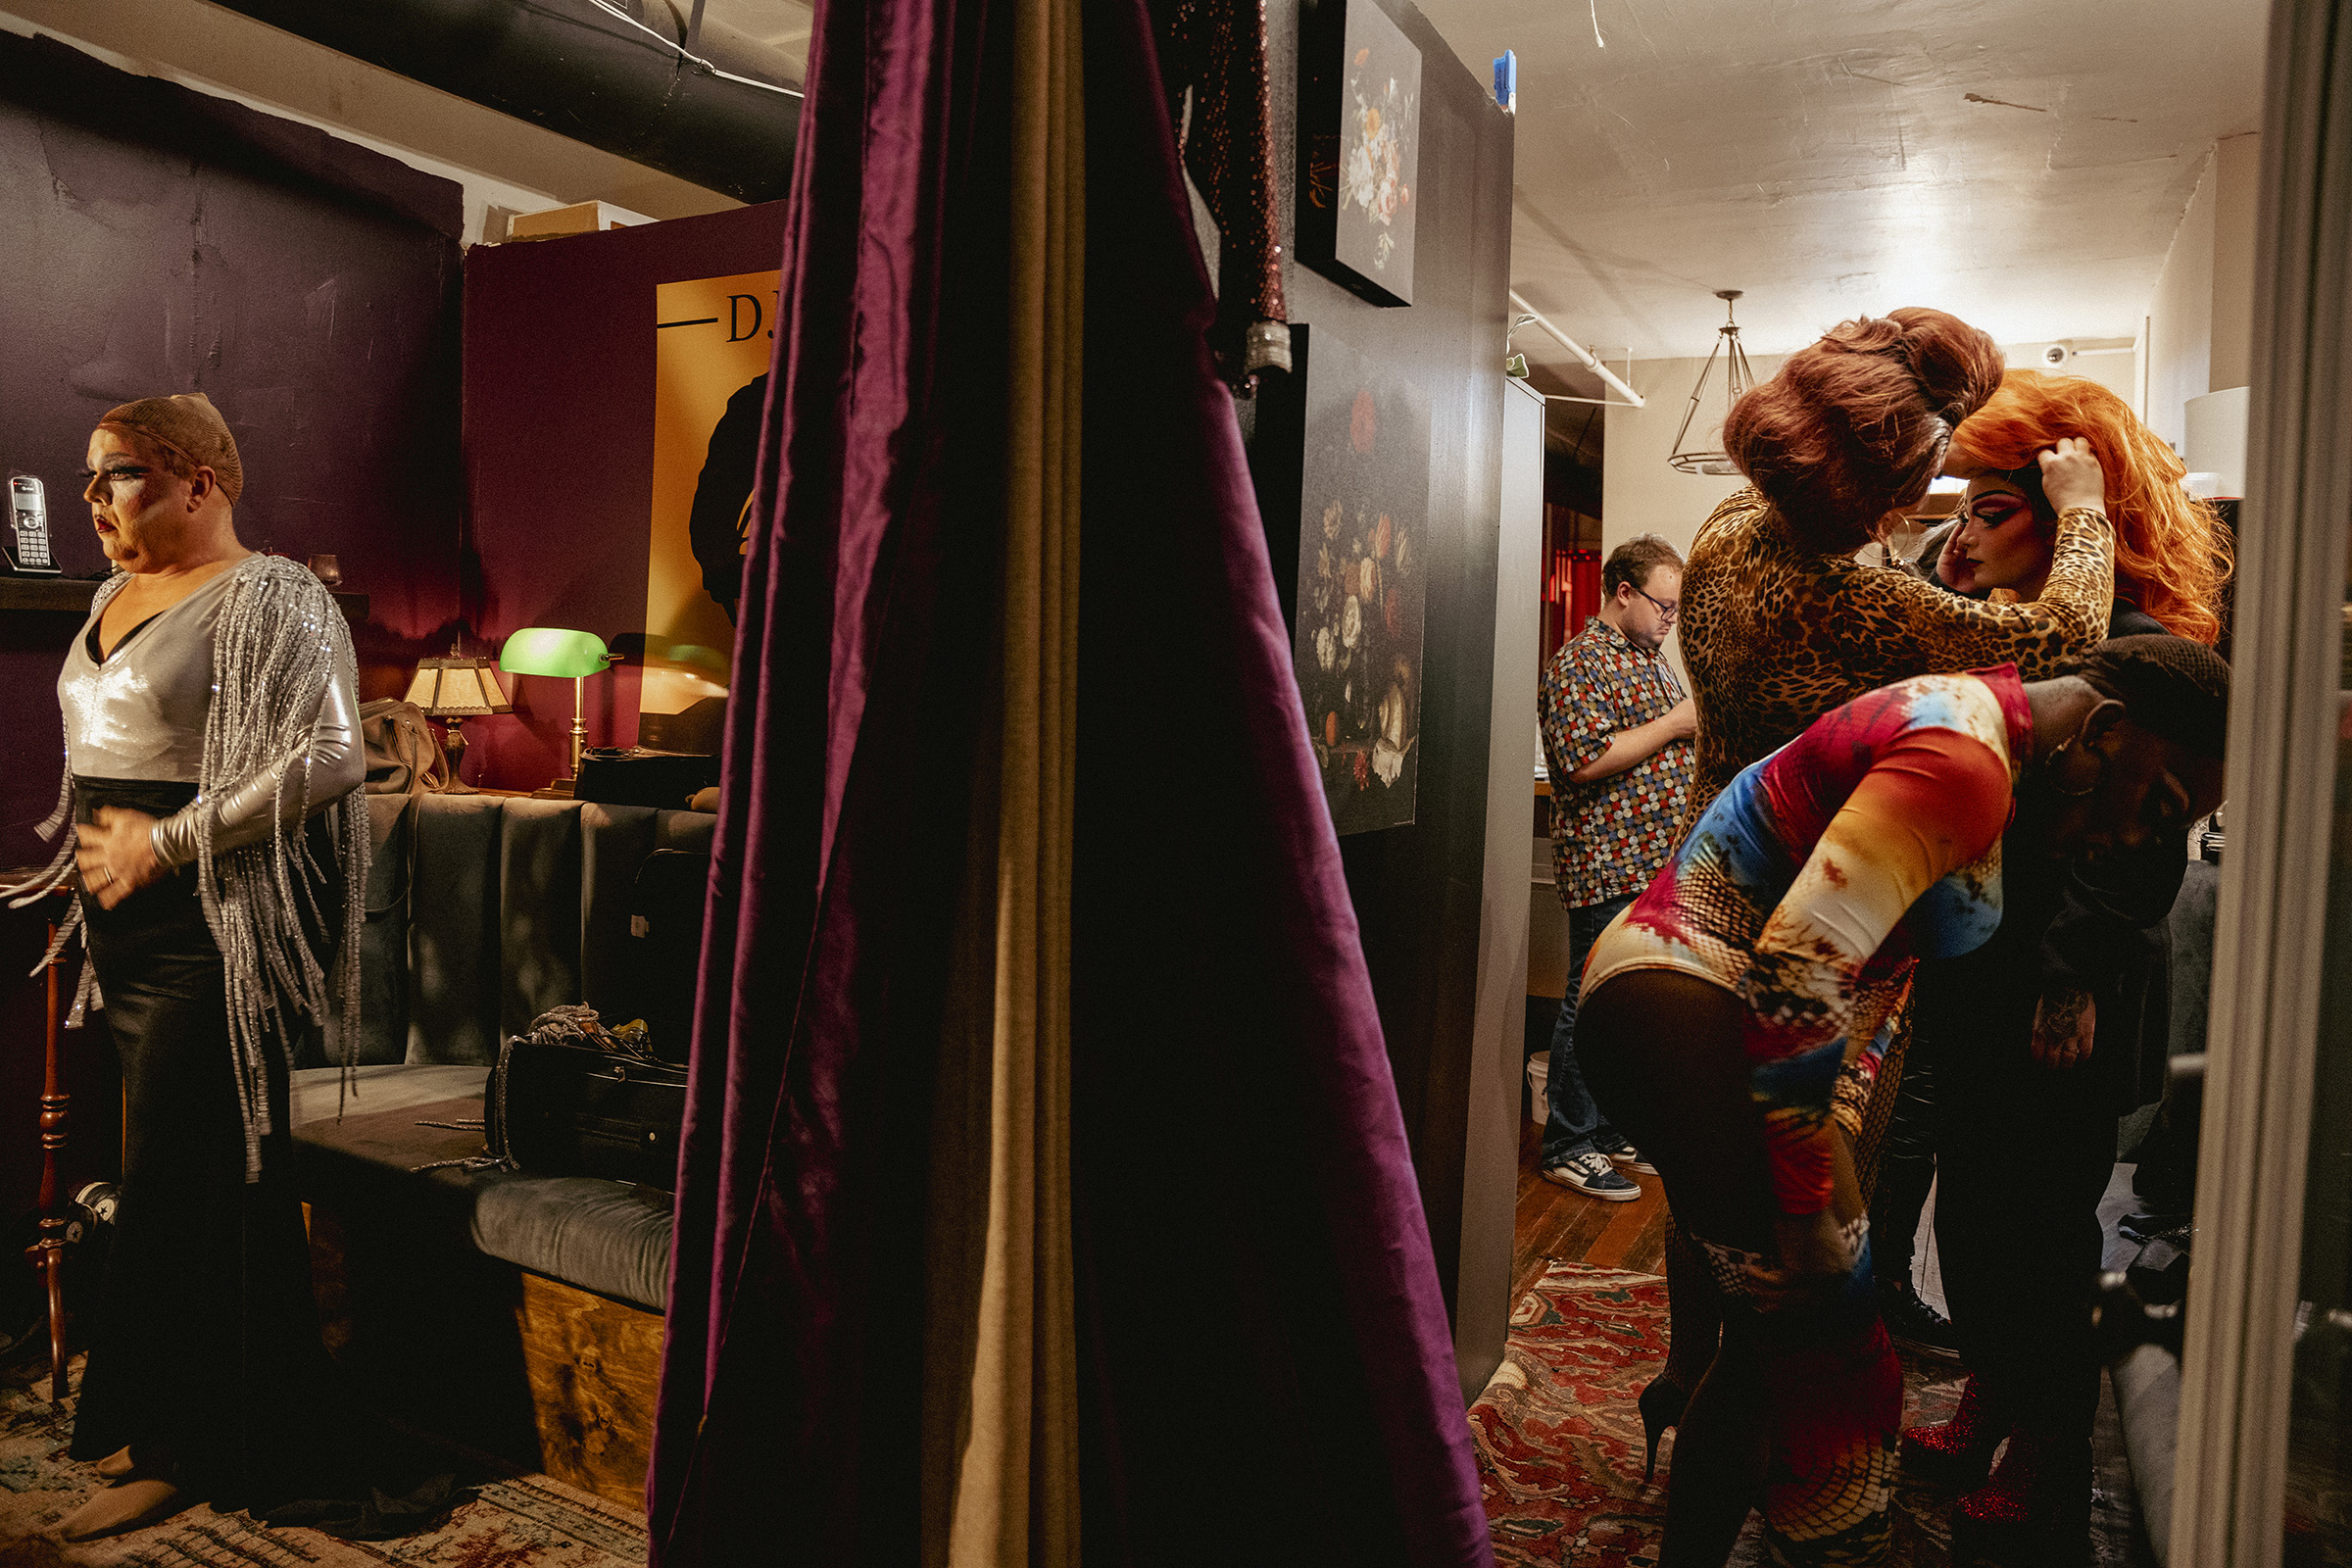 Keleigh Klarke (left) changes into her second look for the evening as other performers get into their own stage wear. (Andrea Morales for TIME)